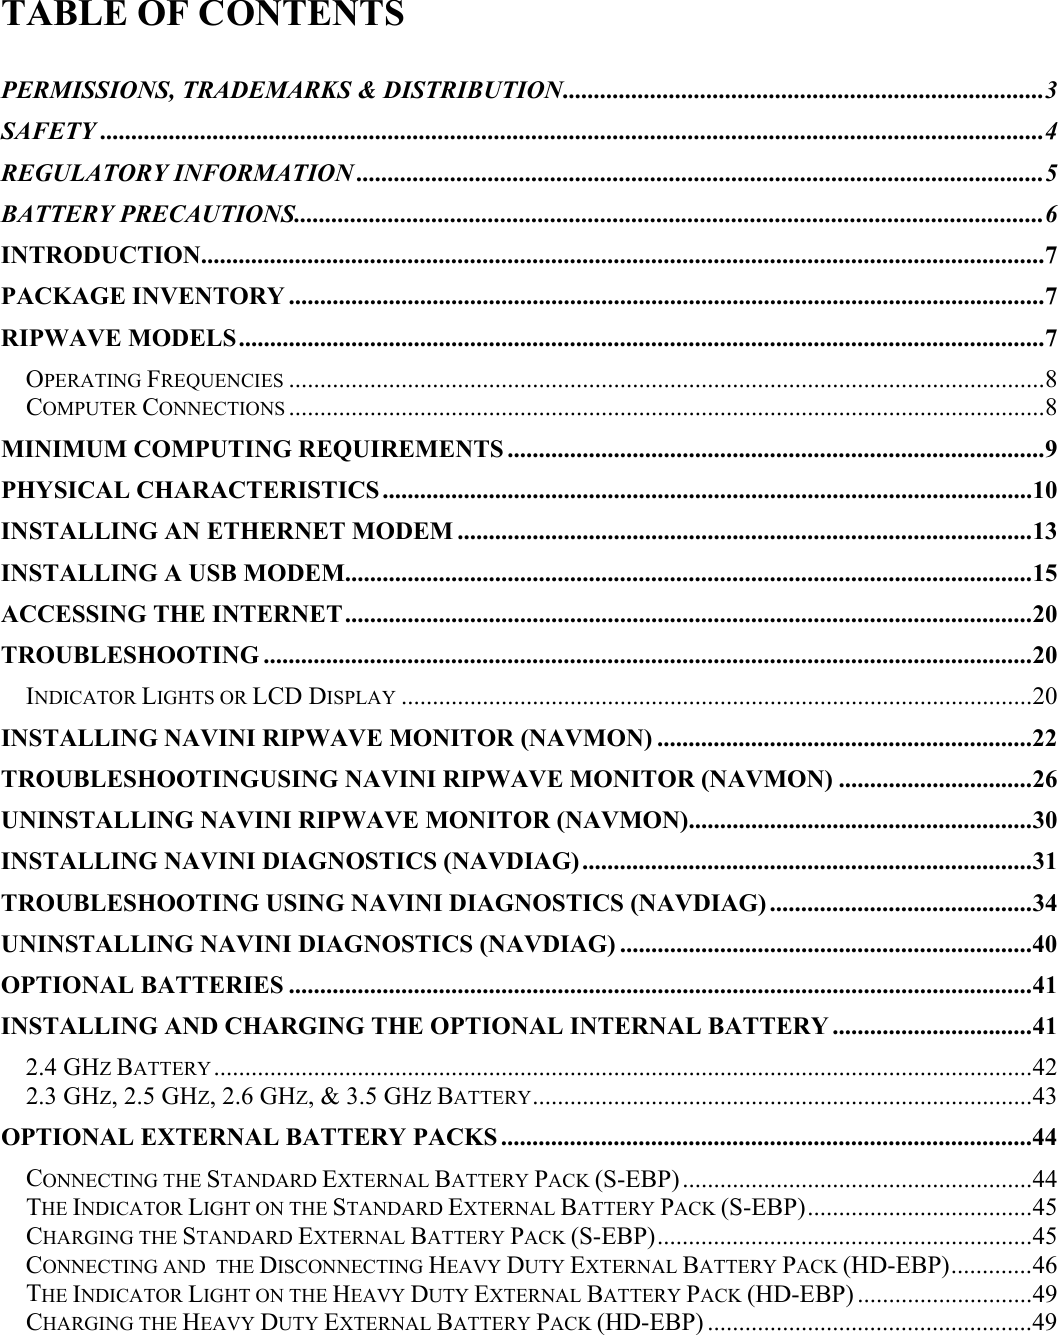   TABLE OF CONTENTS  PERMISSIONS, TRADEMARKS &amp; DISTRIBUTION.............................................................................3 SAFETY .......................................................................................................................................................4 REGULATORY INFORMATION ..............................................................................................................5 BATTERY PRECAUTIONS........................................................................................................................6 INTRODUCTION.......................................................................................................................................7 PACKAGE INVENTORY .........................................................................................................................7 RIPWAVE MODELS.................................................................................................................................7 OPERATING FREQUENCIES .........................................................................................................................8 COMPUTER CONNECTIONS .........................................................................................................................8 MINIMUM COMPUTING REQUIREMENTS ......................................................................................9 PHYSICAL CHARACTERISTICS ........................................................................................................10 INSTALLING AN ETHERNET MODEM ............................................................................................13 INSTALLING A USB MODEM..............................................................................................................15 ACCESSING THE INTERNET..............................................................................................................20 TROUBLESHOOTING ...........................................................................................................................20 INDICATOR LIGHTS OR LCD DISPLAY .....................................................................................................20 INSTALLING NAVINI RIPWAVE MONITOR (NAVMON) ............................................................22 TROUBLESHOOTINGUSING NAVINI RIPWAVE MONITOR (NAVMON) ...............................26 UNINSTALLING NAVINI RIPWAVE MONITOR (NAVMON).......................................................30 INSTALLING NAVINI DIAGNOSTICS (NAVDIAG)........................................................................31 TROUBLESHOOTING USING NAVINI DIAGNOSTICS (NAVDIAG) ..........................................34 UNINSTALLING NAVINI DIAGNOSTICS (NAVDIAG) ..................................................................40 OPTIONAL BATTERIES .......................................................................................................................41 INSTALLING AND CHARGING THE OPTIONAL INTERNAL BATTERY ................................41 2.4 GHZ BATTERY...................................................................................................................................42 2.3 GHZ, 2.5 GHZ, 2.6 GHZ, &amp; 3.5 GHZ BATTERY................................................................................43 OPTIONAL EXTERNAL BATTERY PACKS .....................................................................................44 CONNECTING THE STANDARD EXTERNAL BATTERY PACK (S-EBP)........................................................44 THE INDICATOR LIGHT ON THE STANDARD EXTERNAL BATTERY PACK (S-EBP)....................................45 CHARGING THE STANDARD EXTERNAL BATTERY PACK (S-EBP)............................................................45 CONNECTING AND  THE DISCONNECTING HEAVY DUTY EXTERNAL BATTERY PACK (HD-EBP).............46 THE INDICATOR LIGHT ON THE HEAVY DUTY EXTERNAL BATTERY PACK (HD-EBP) ............................49 CHARGING THE HEAVY DUTY EXTERNAL BATTERY PACK (HD-EBP) ....................................................49 